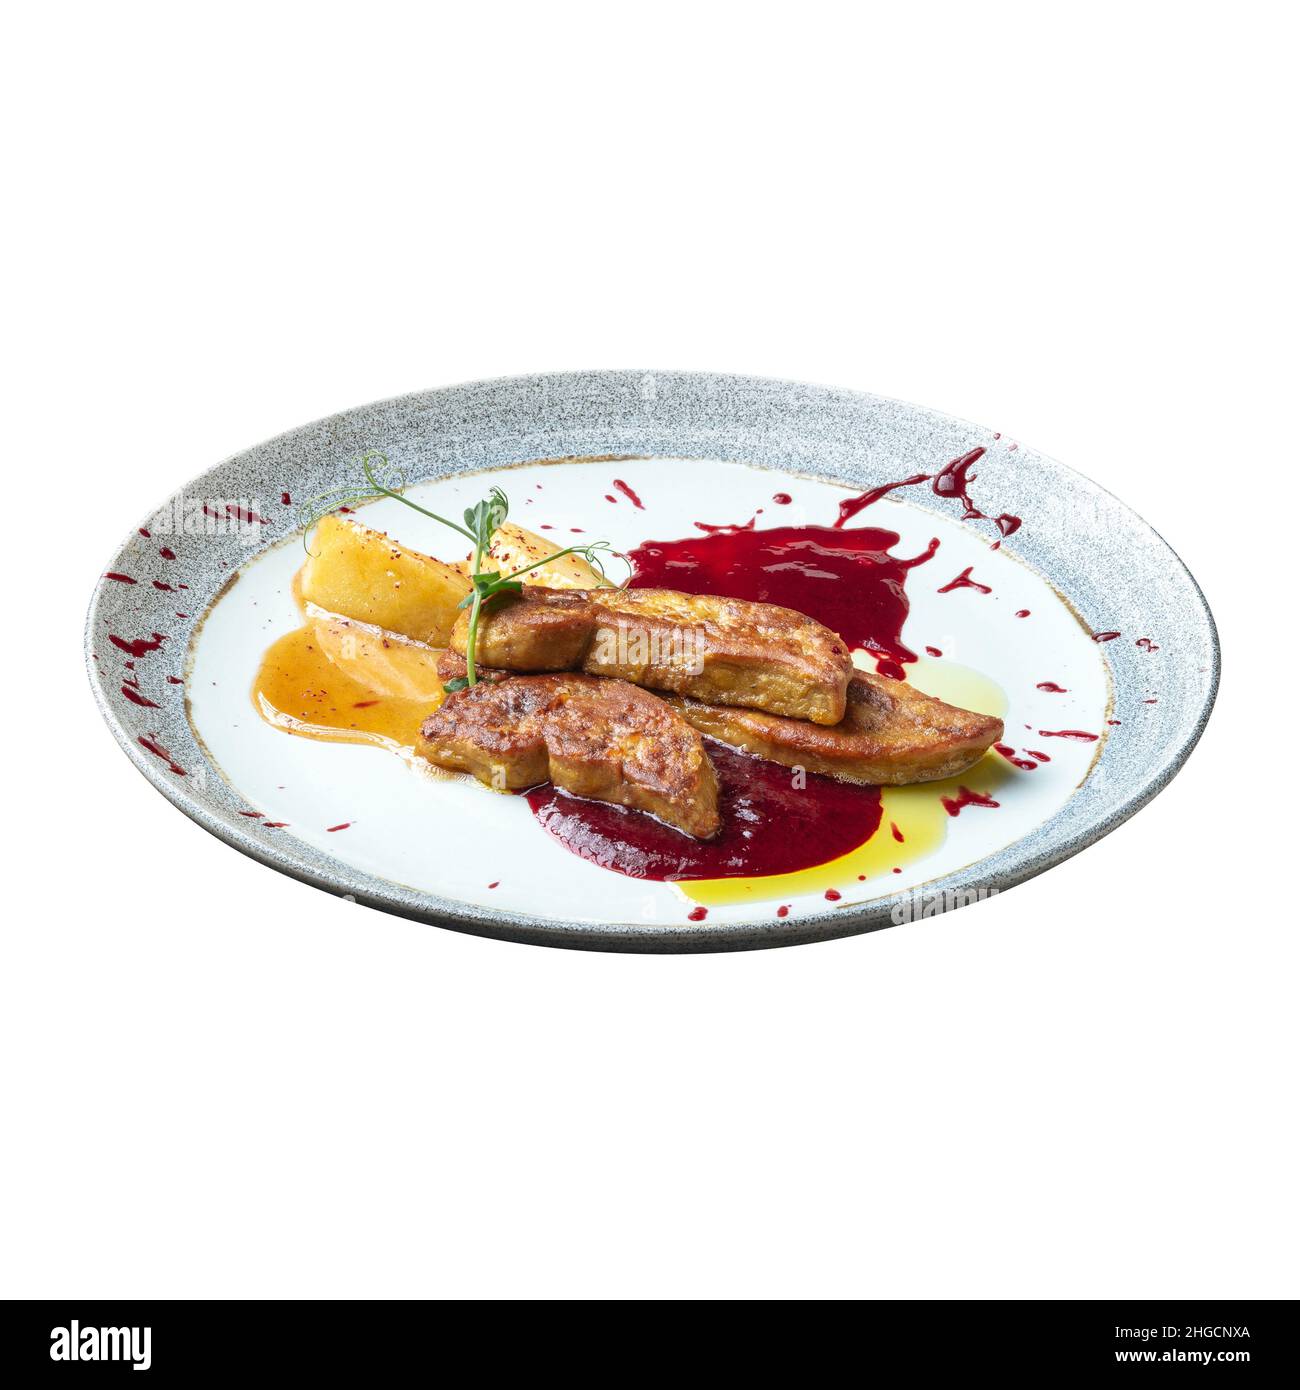 Isolated foie gras with apples and berry sauce Stock Photo